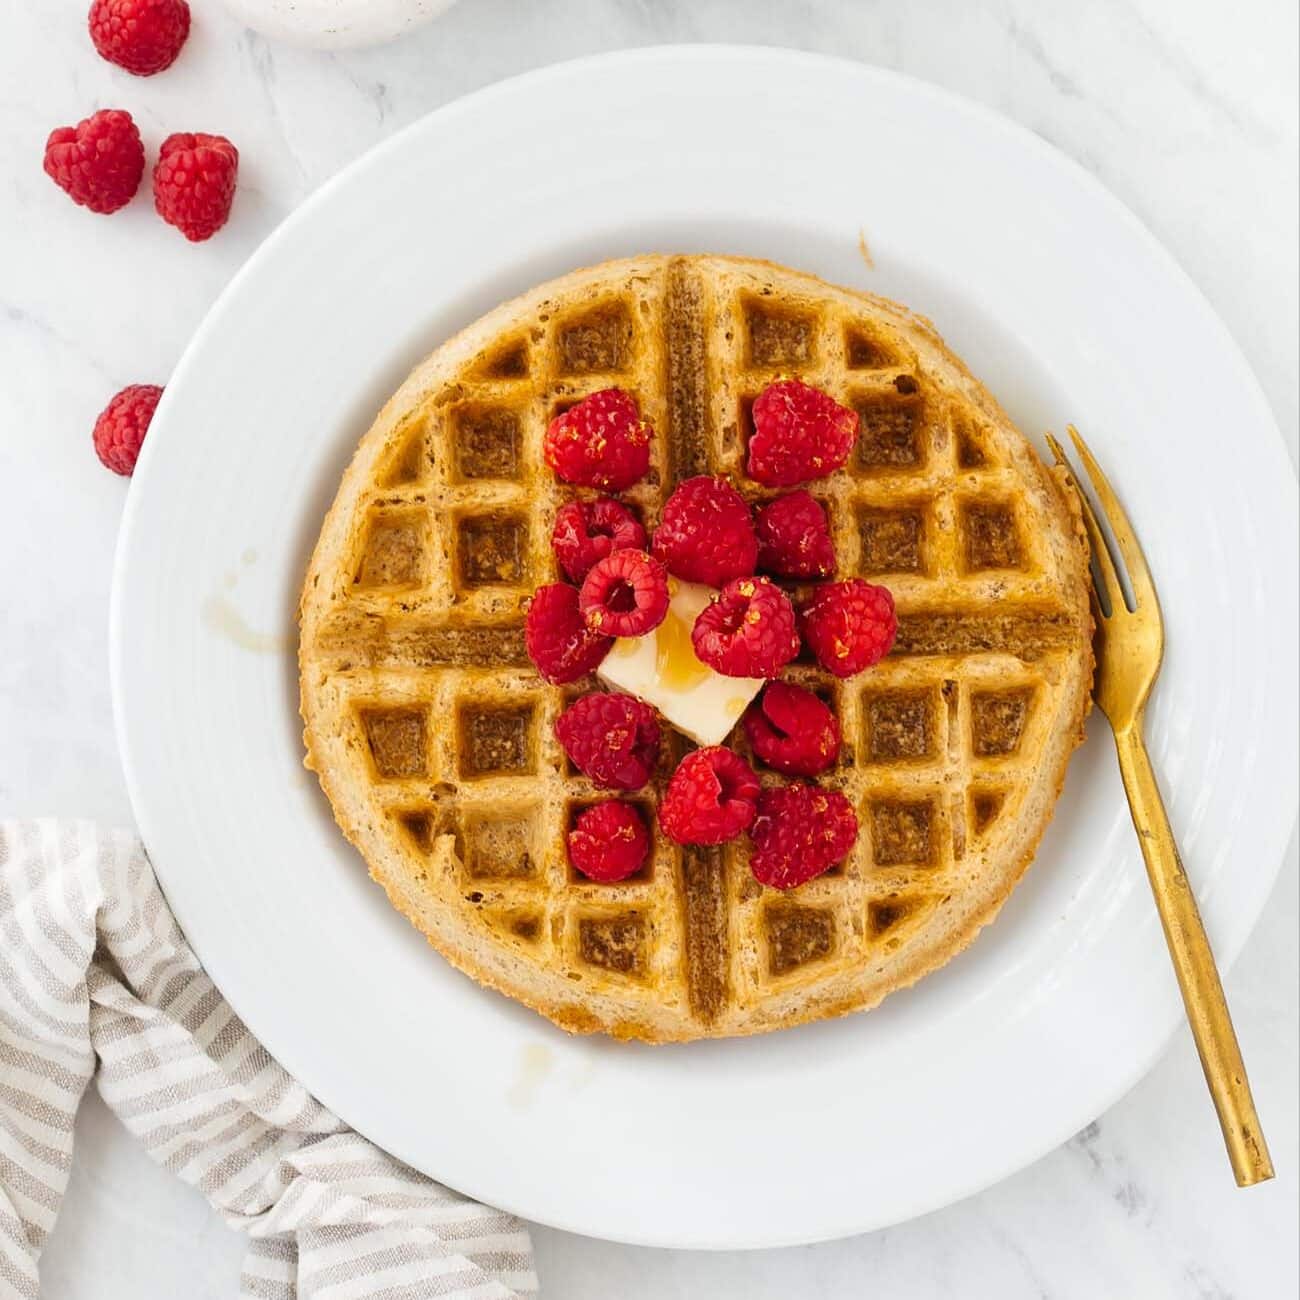 Gluten-free waffles topped with raspberries.